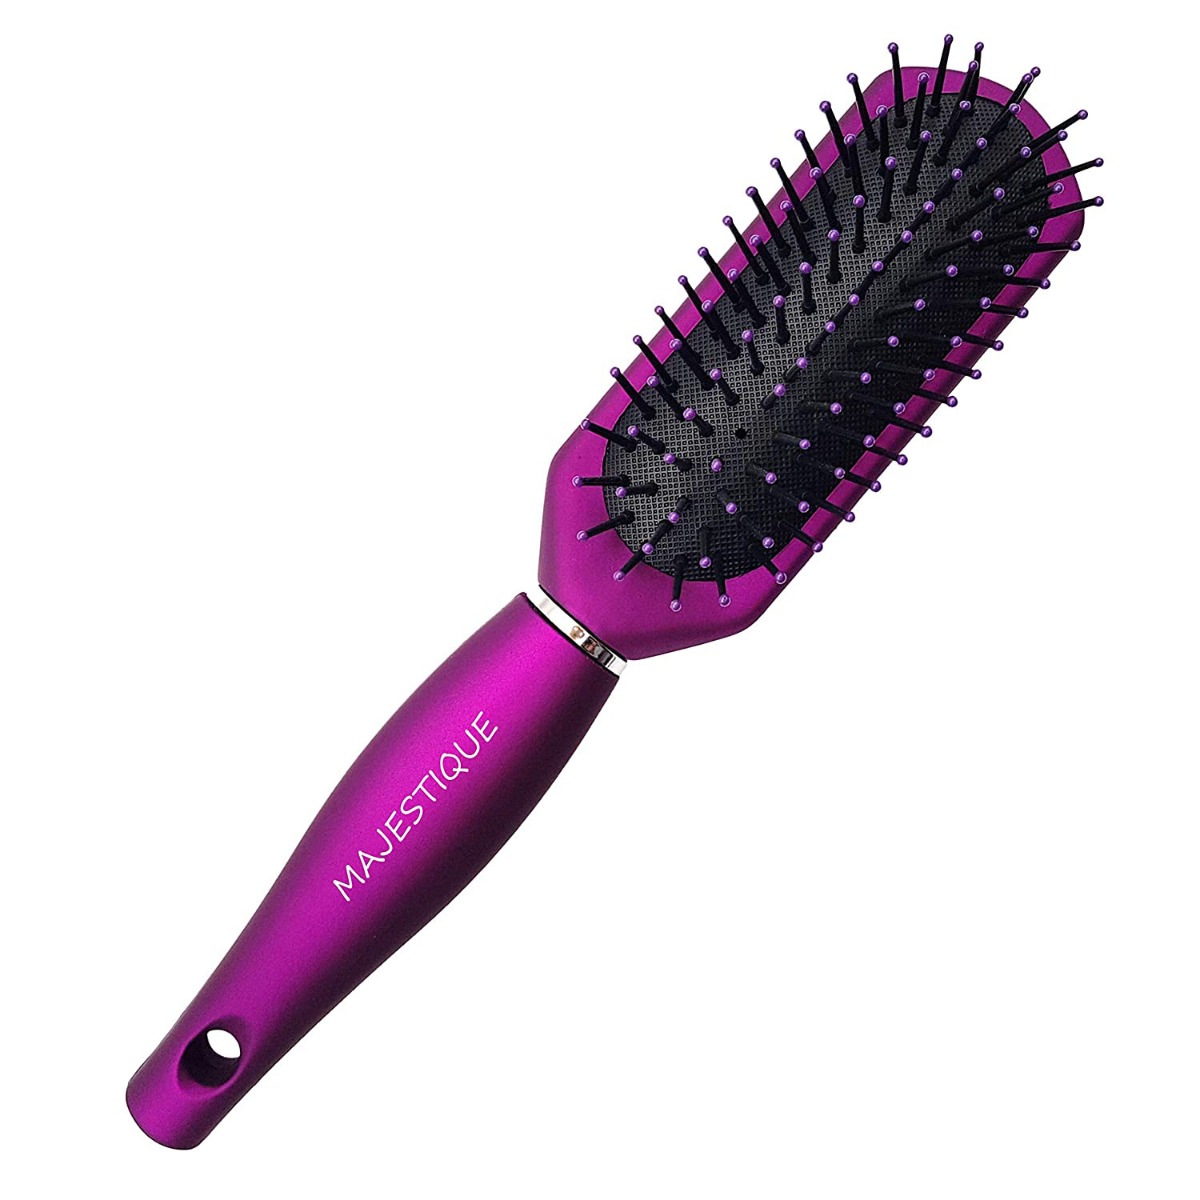 Majestique Styling Brush For Curly Hair 7 Row - Purple, 1Pc